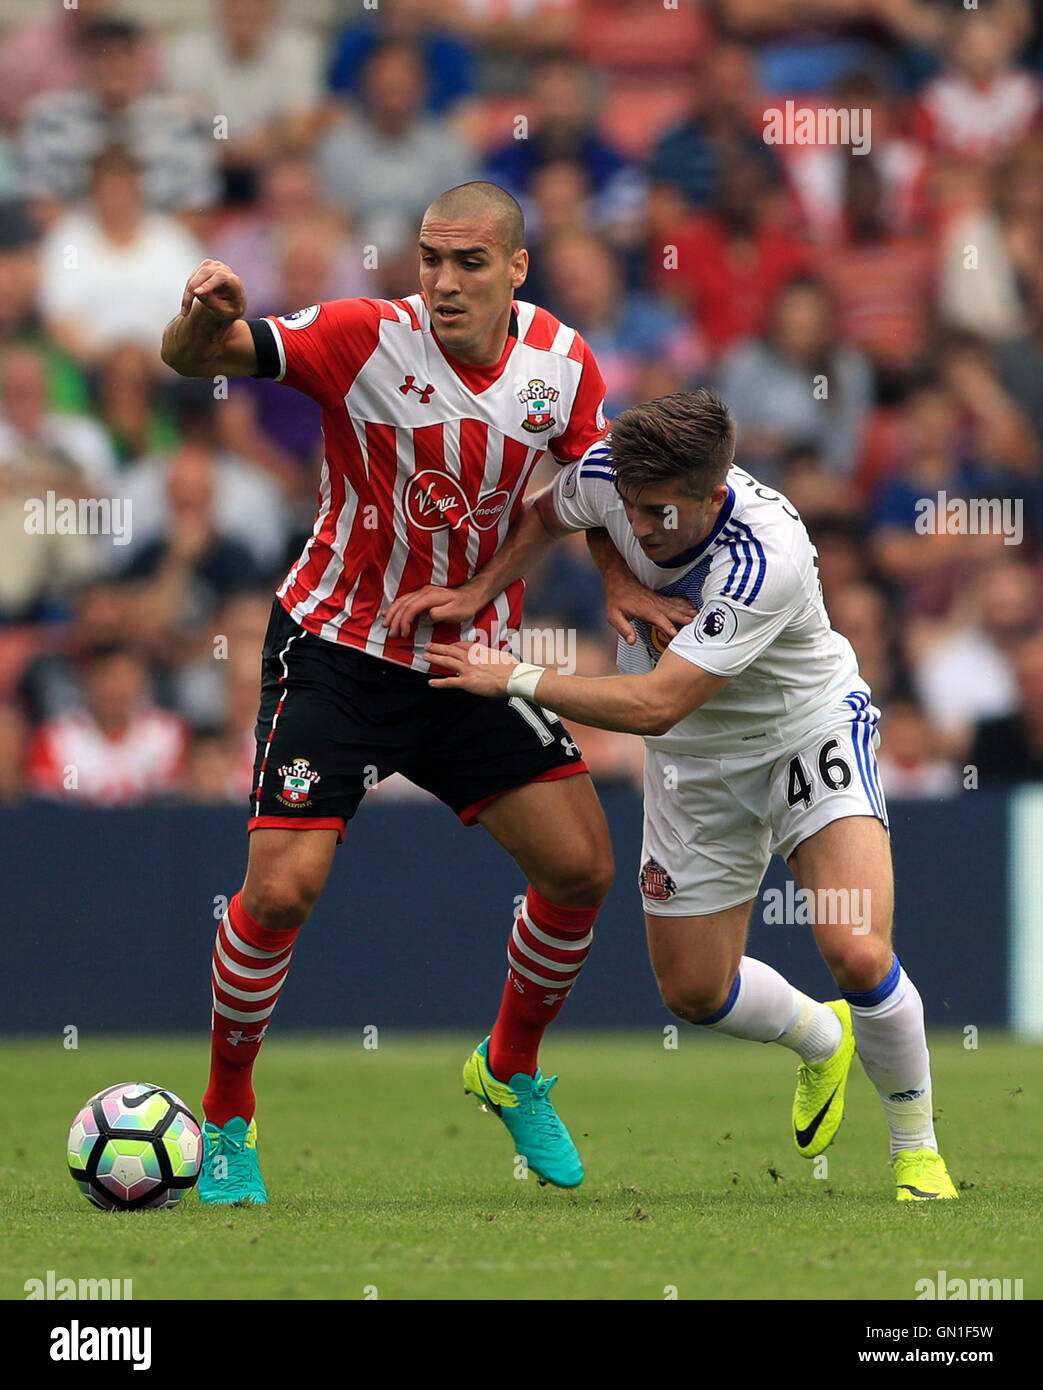 Southampton's Oriol Romeu (left) and Sunderland's Lynden Gooch battle for the ball during the Premier League match at St Mary's Stadium, Southampton. Stock Photo